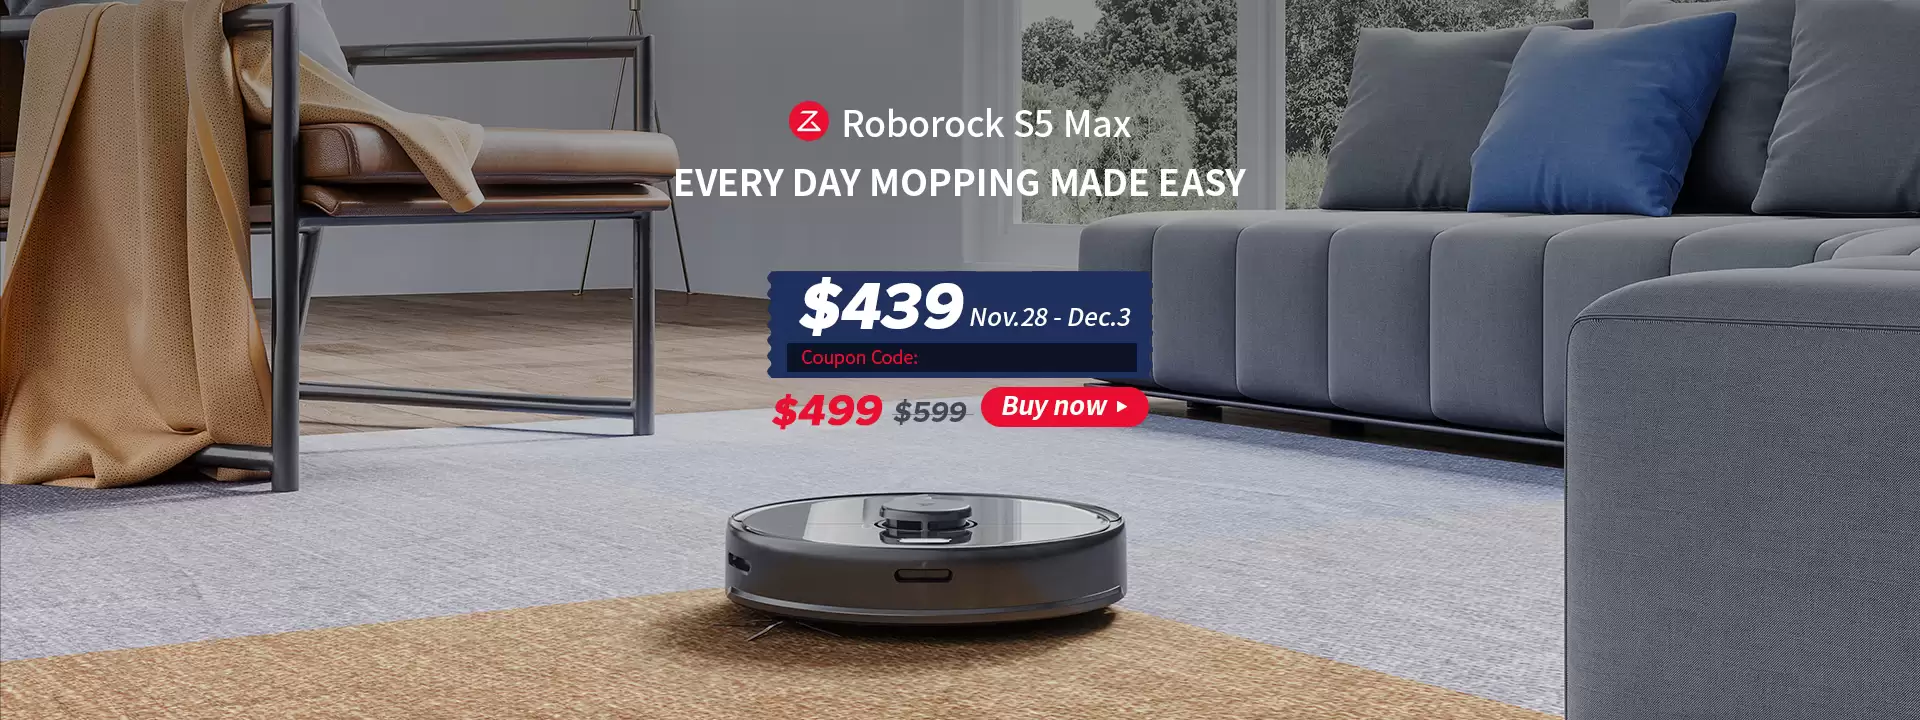 Order In Just $449.99 Roborock S5 Max Laser Navigation Robot Wet And Dry Vacuum Cleaner From Xiaomi Youpin - Black Eu Plug At Gearbest With This Coupon